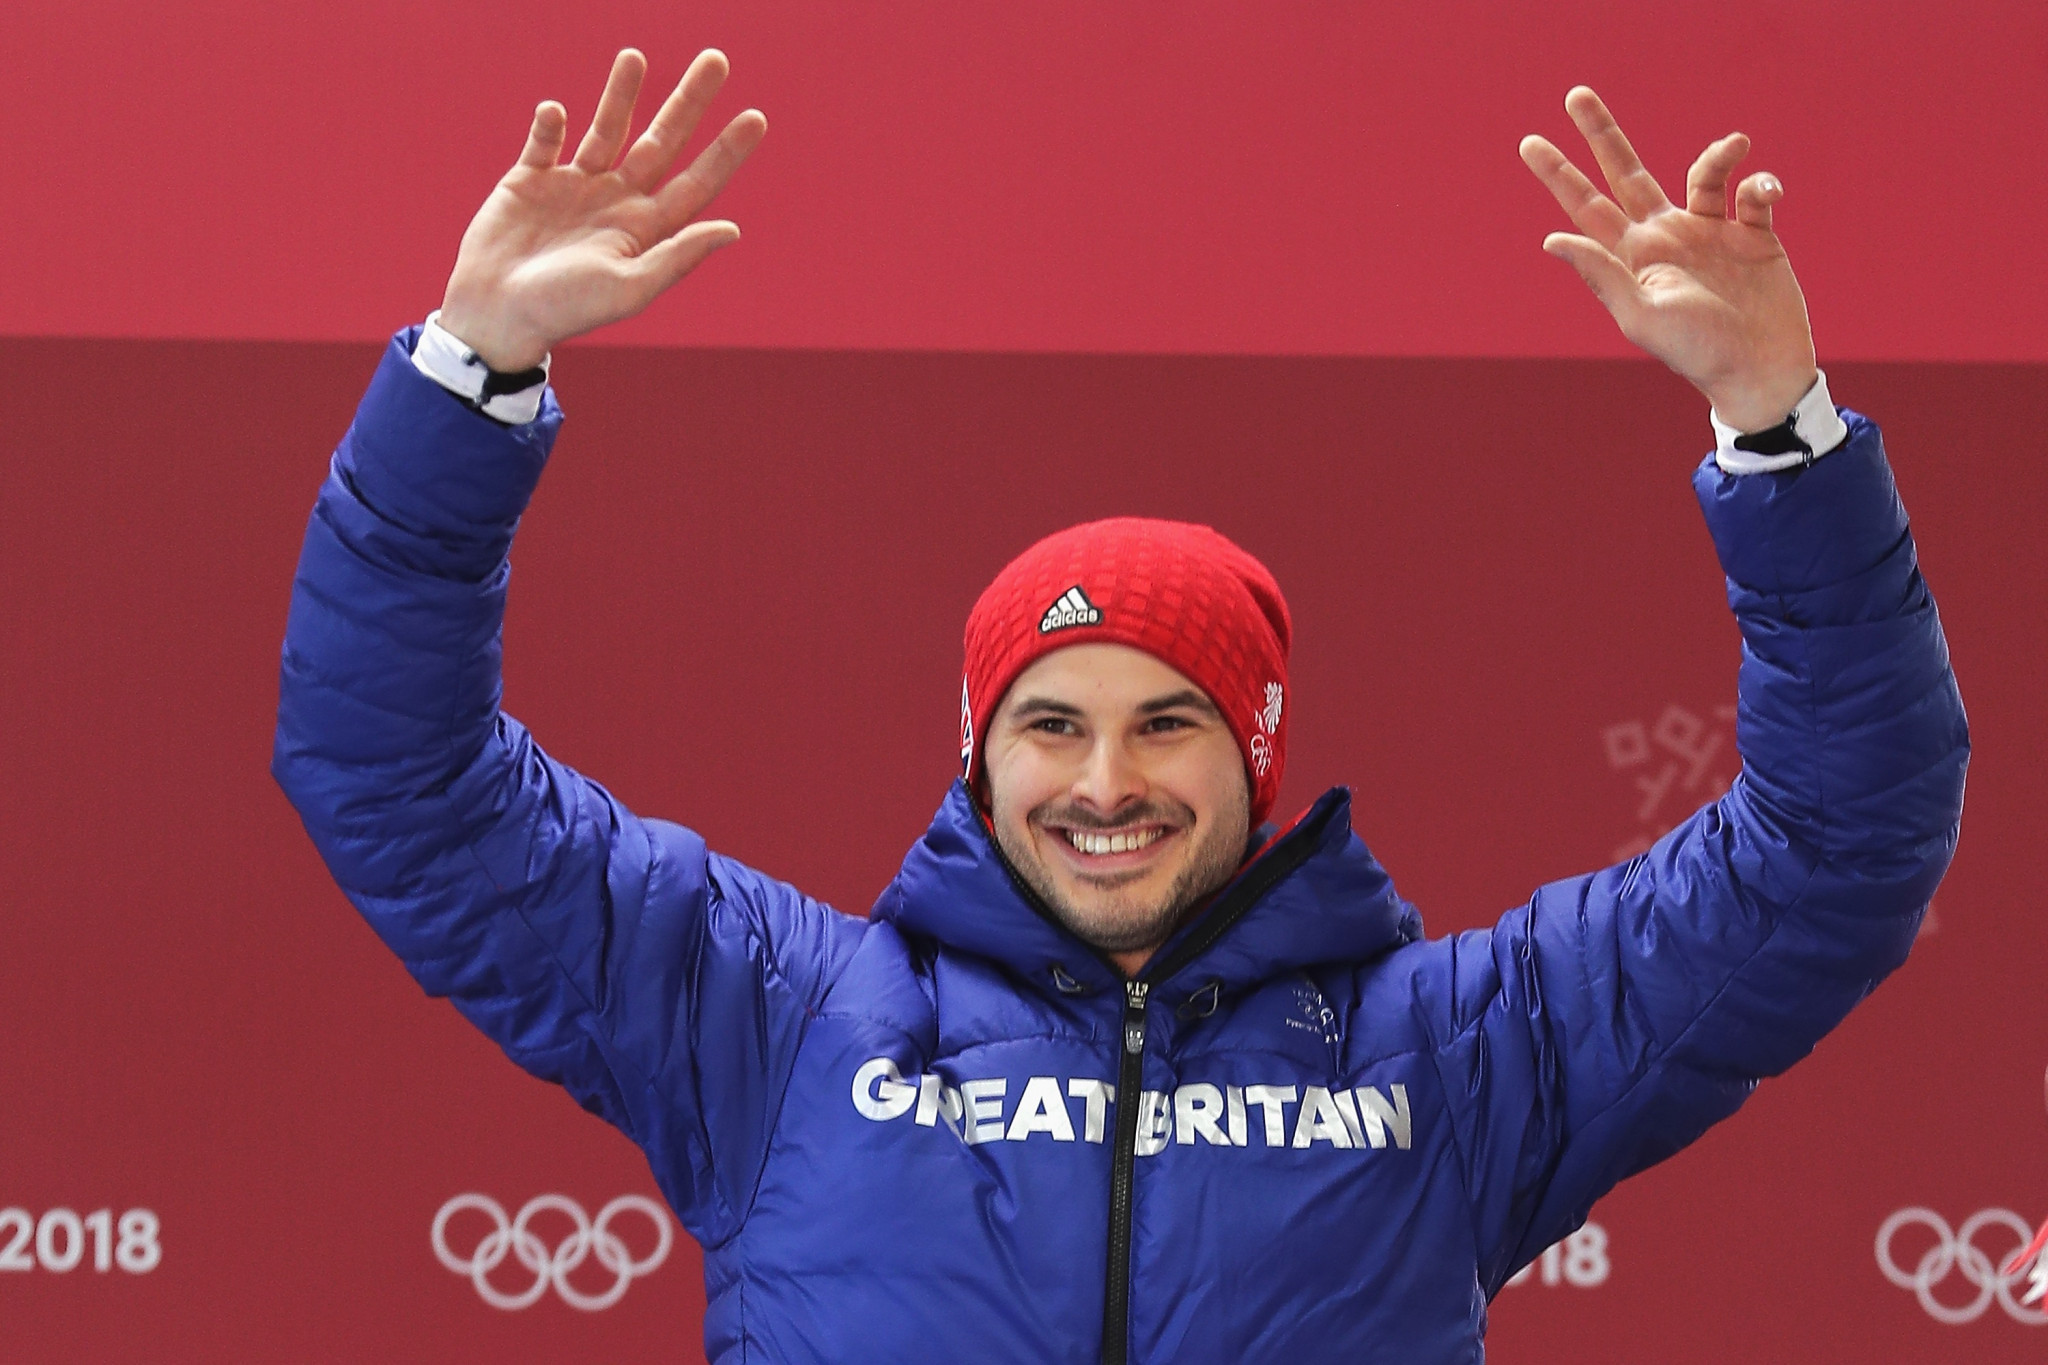 Dom Parsons finished third to secure Great Britain’s first Olympic medal in men’s skeleton since 1948 ©Getty Images